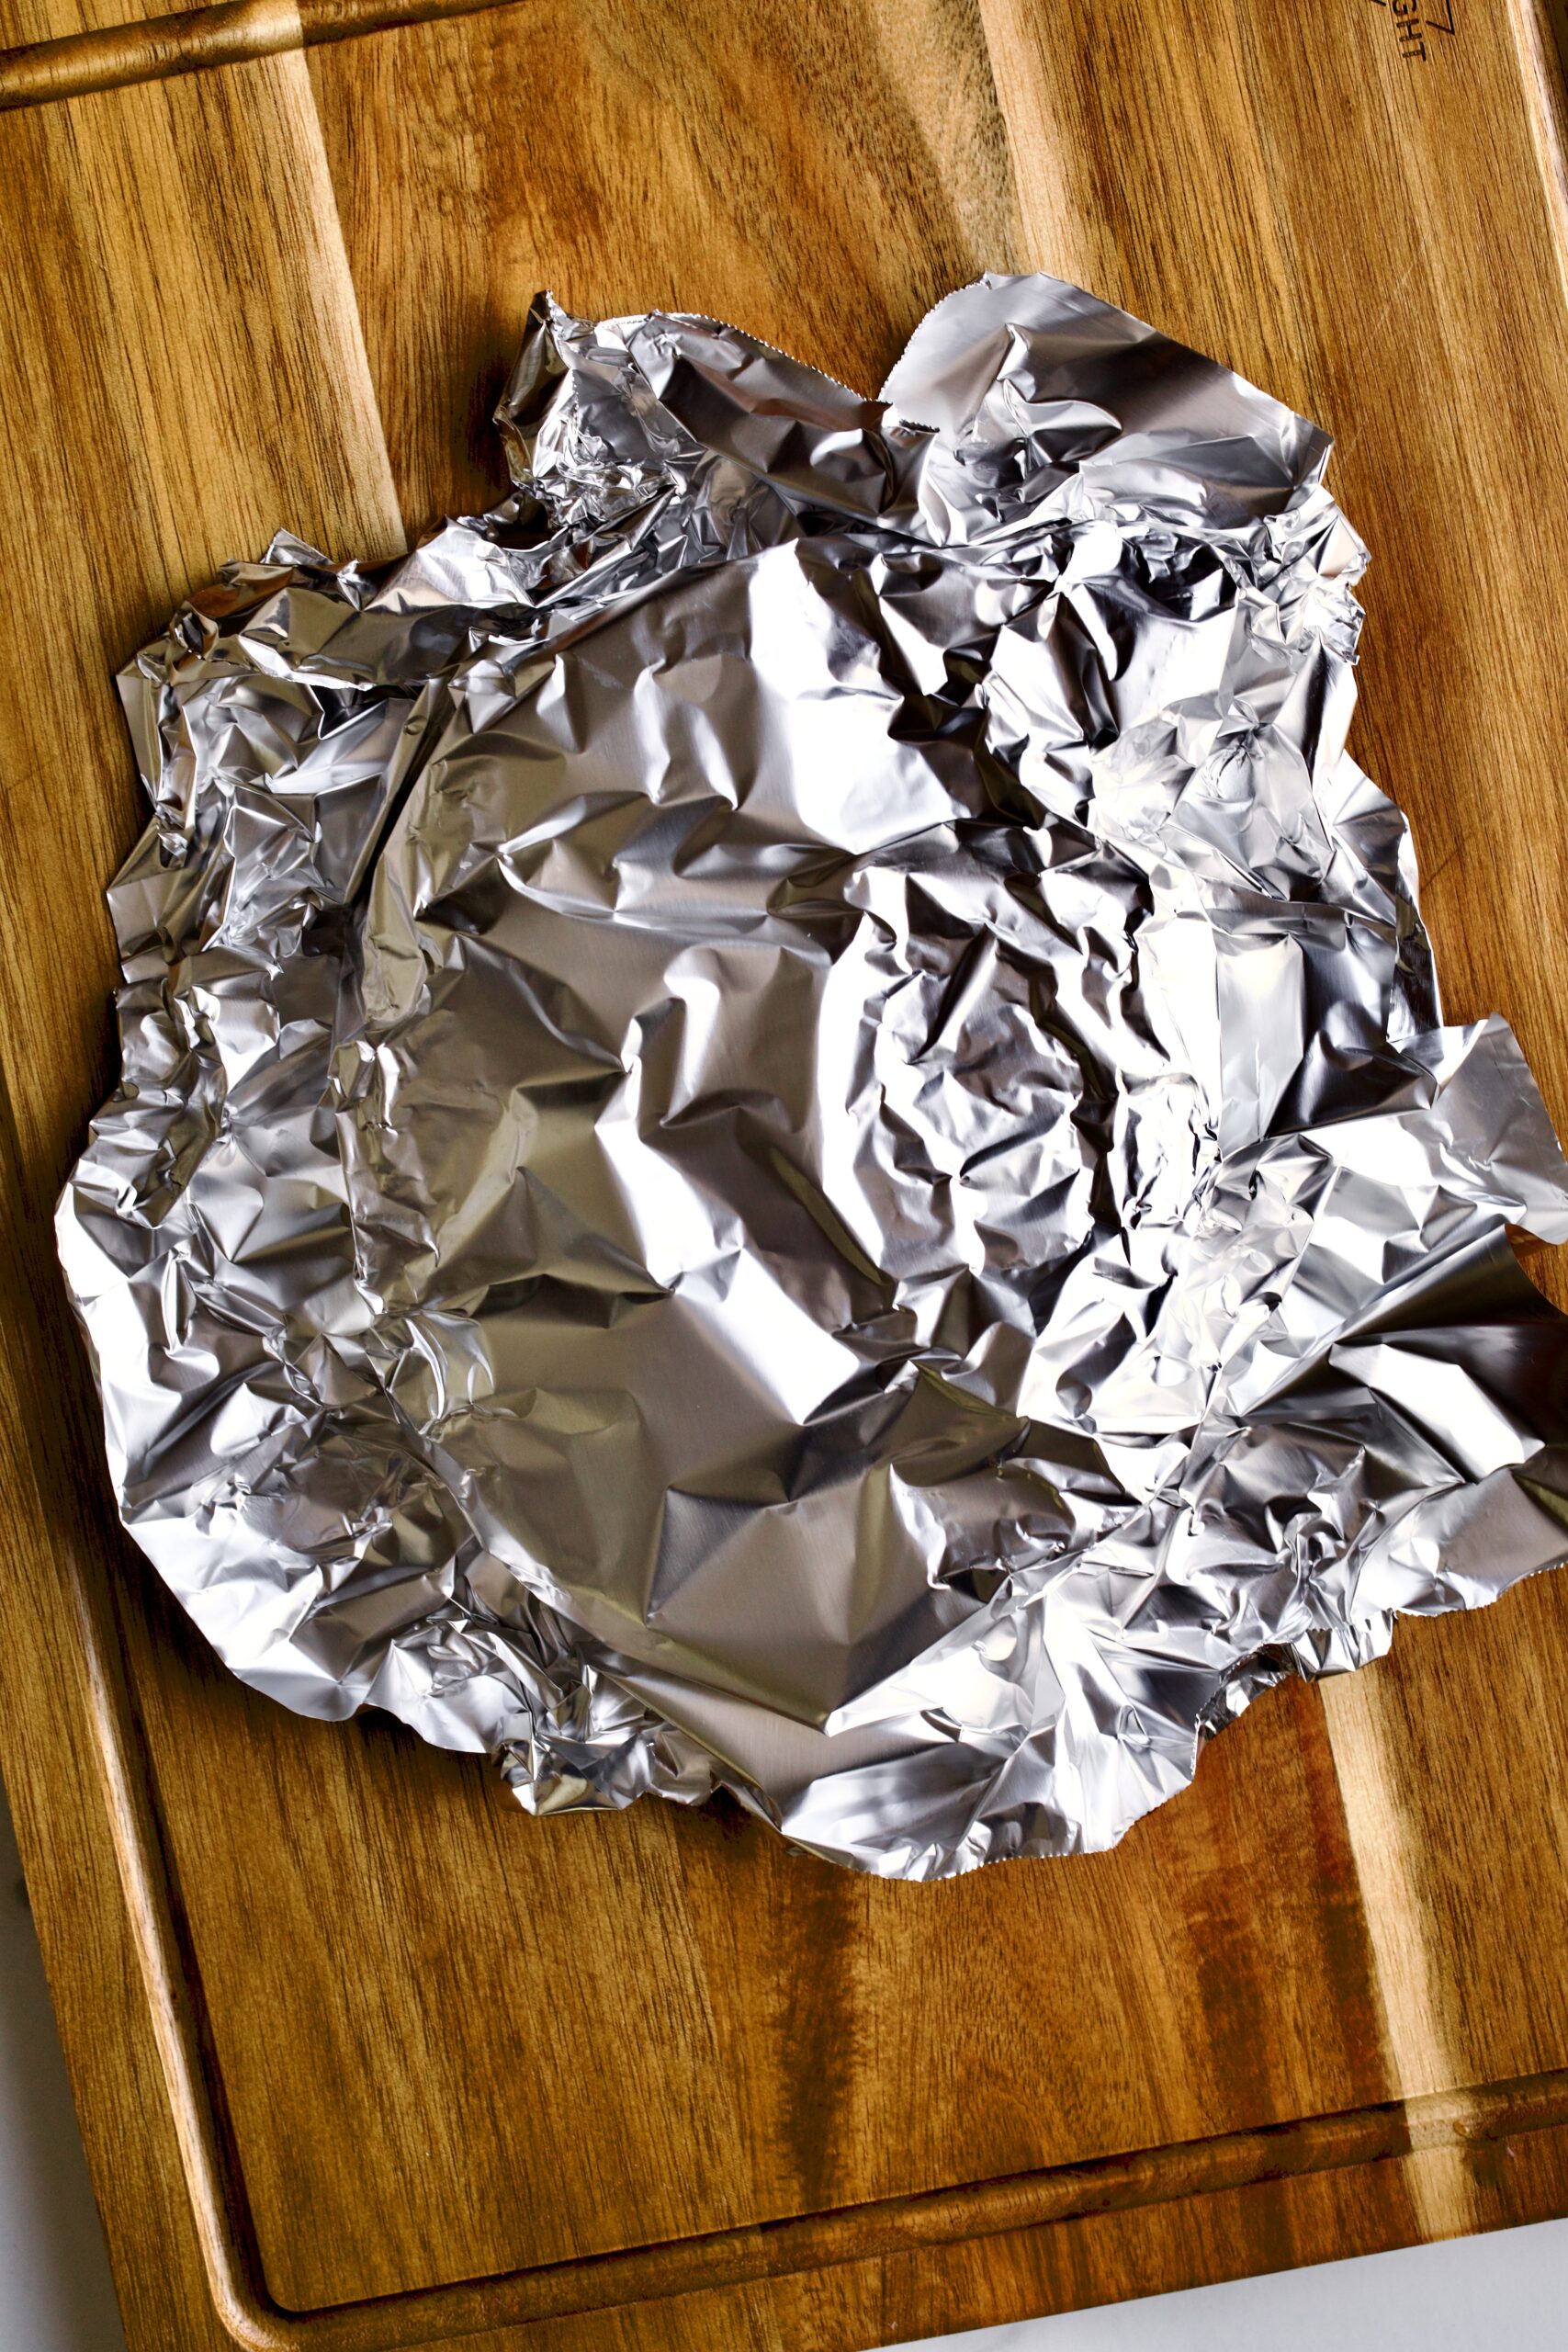 covering steak with tinfoil to let it rest.